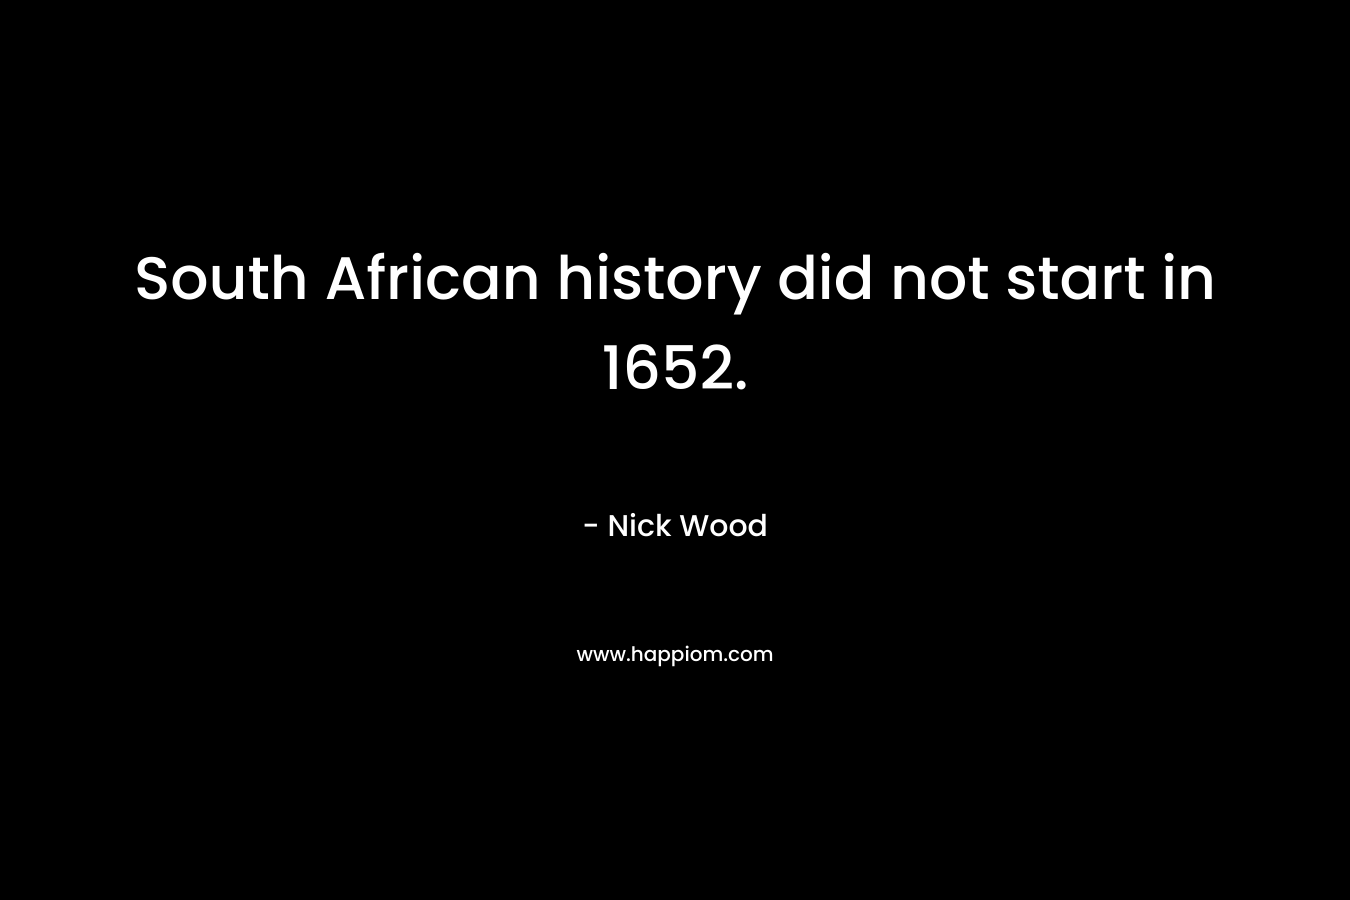 South African history did not start in 1652.